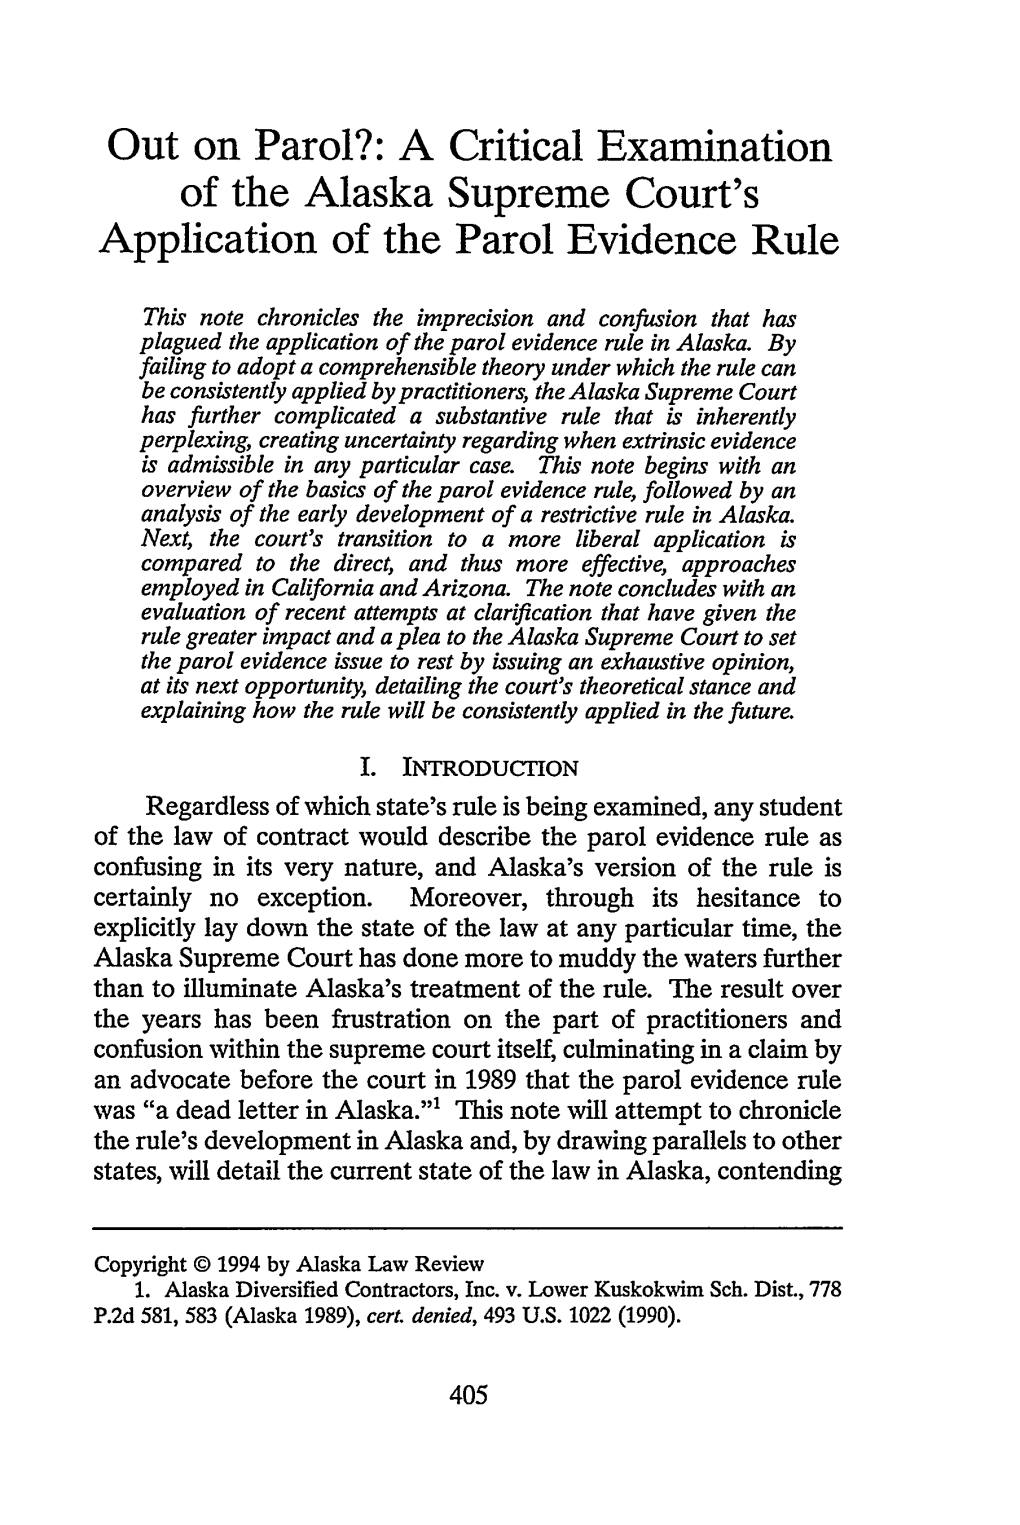 A Critical Examination of the Alaska Supreme Court's Application of the Parol Evidence Rule